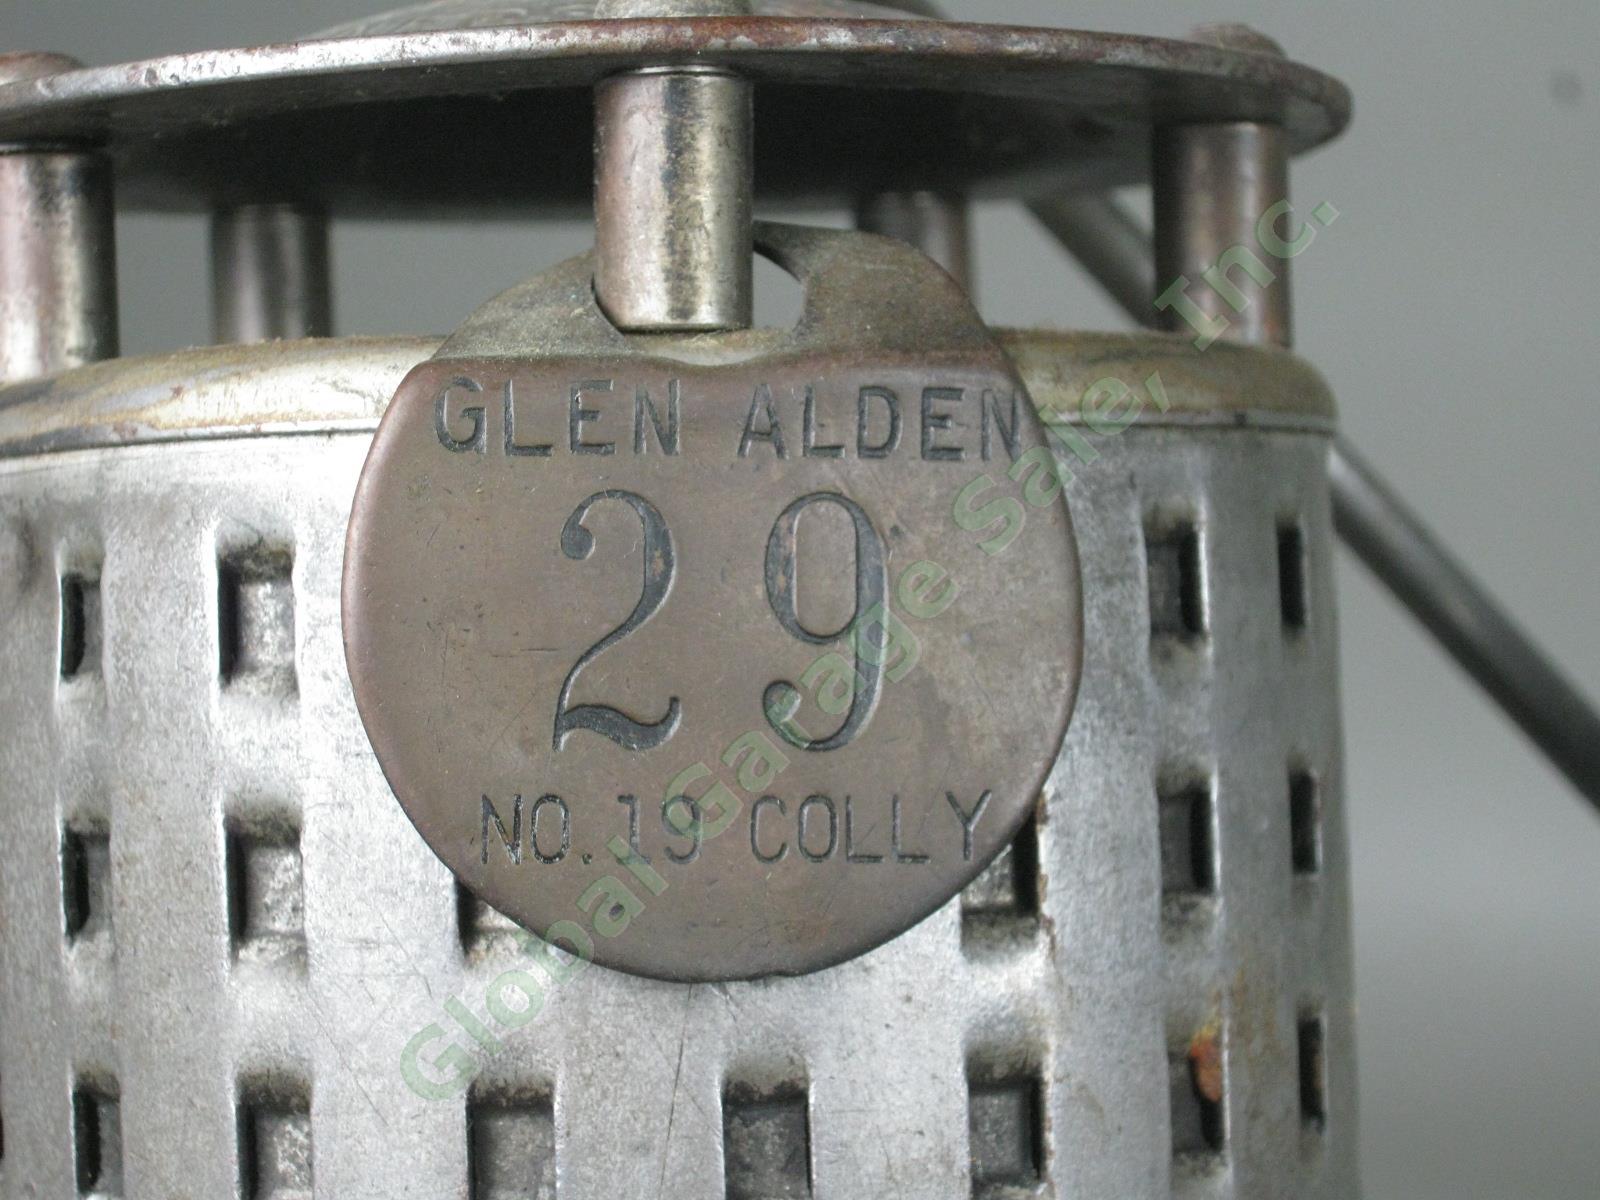 Vtg Permissible 201 Miners Safety Lamp Glen Alden Coal Co 29 No 19 Colly Tag NR! 2